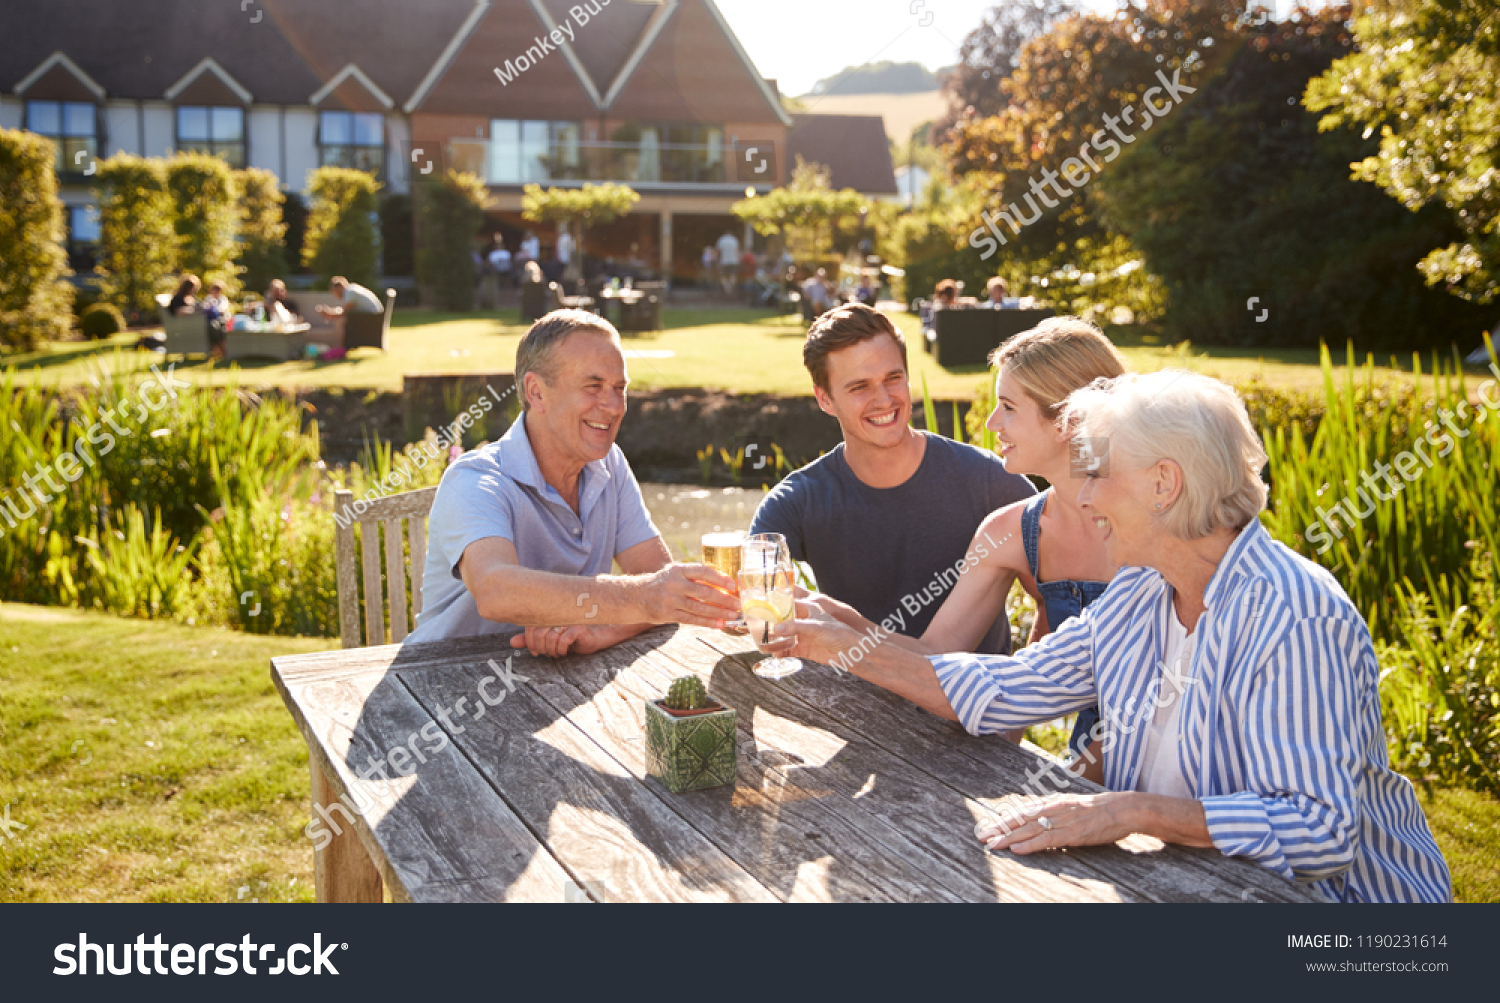 Parents With Adult Offspring Enjoying Outdoor Summer Drink At Pub #1190231614